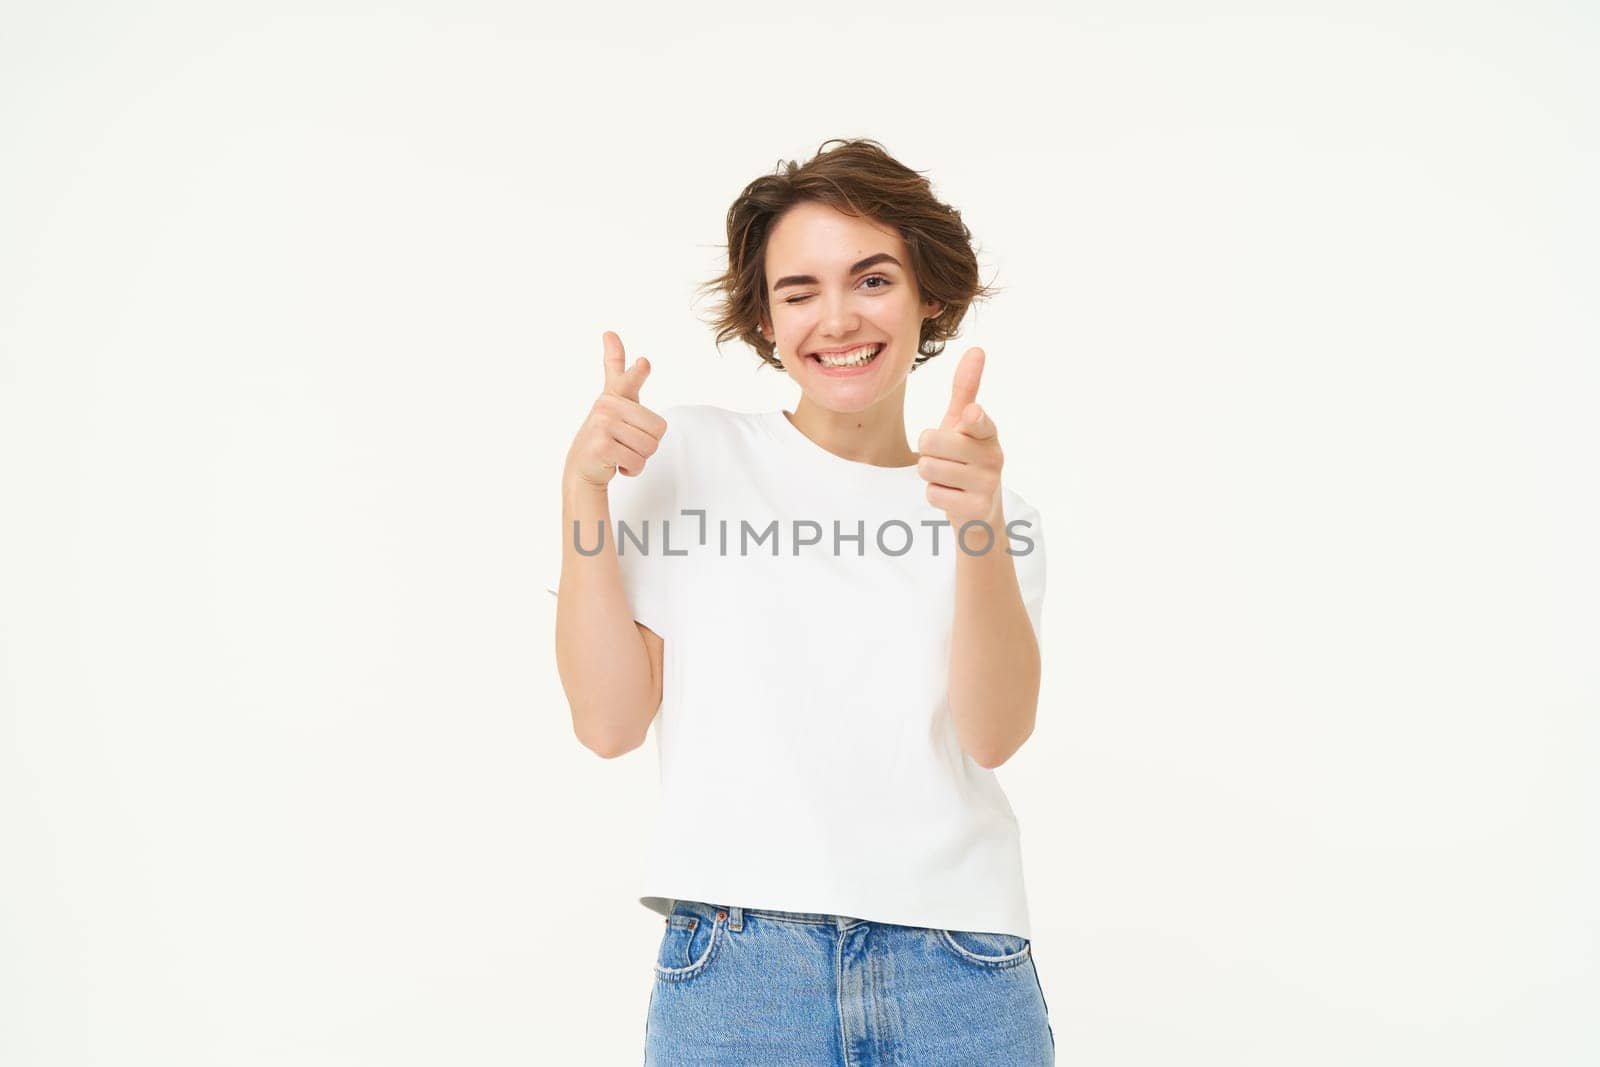 Portrait of cheerful young woman, shows thumbs up in approval, like something good, nod in approval, looking confident, standing over white background.